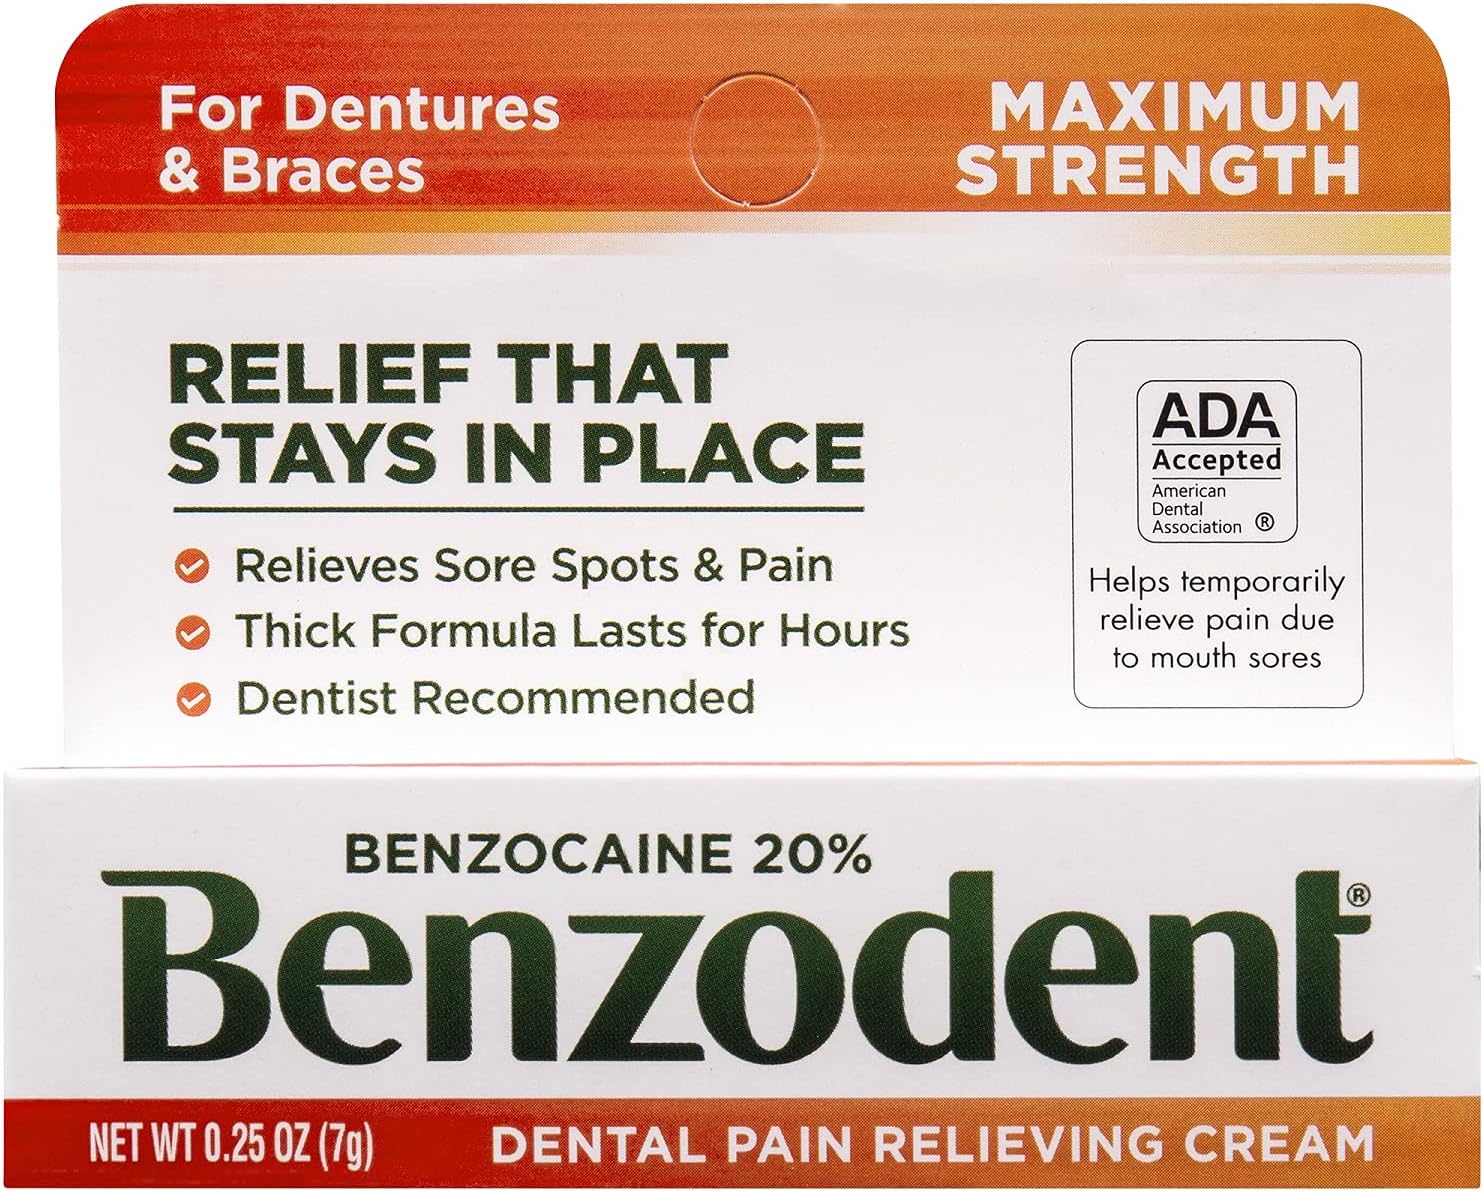 0.25-Oz Benzodent Dental Pain Relieving Cream for Dentures and Braces $2.65 w/ S&S + Free S&H w/ Prime or $25+